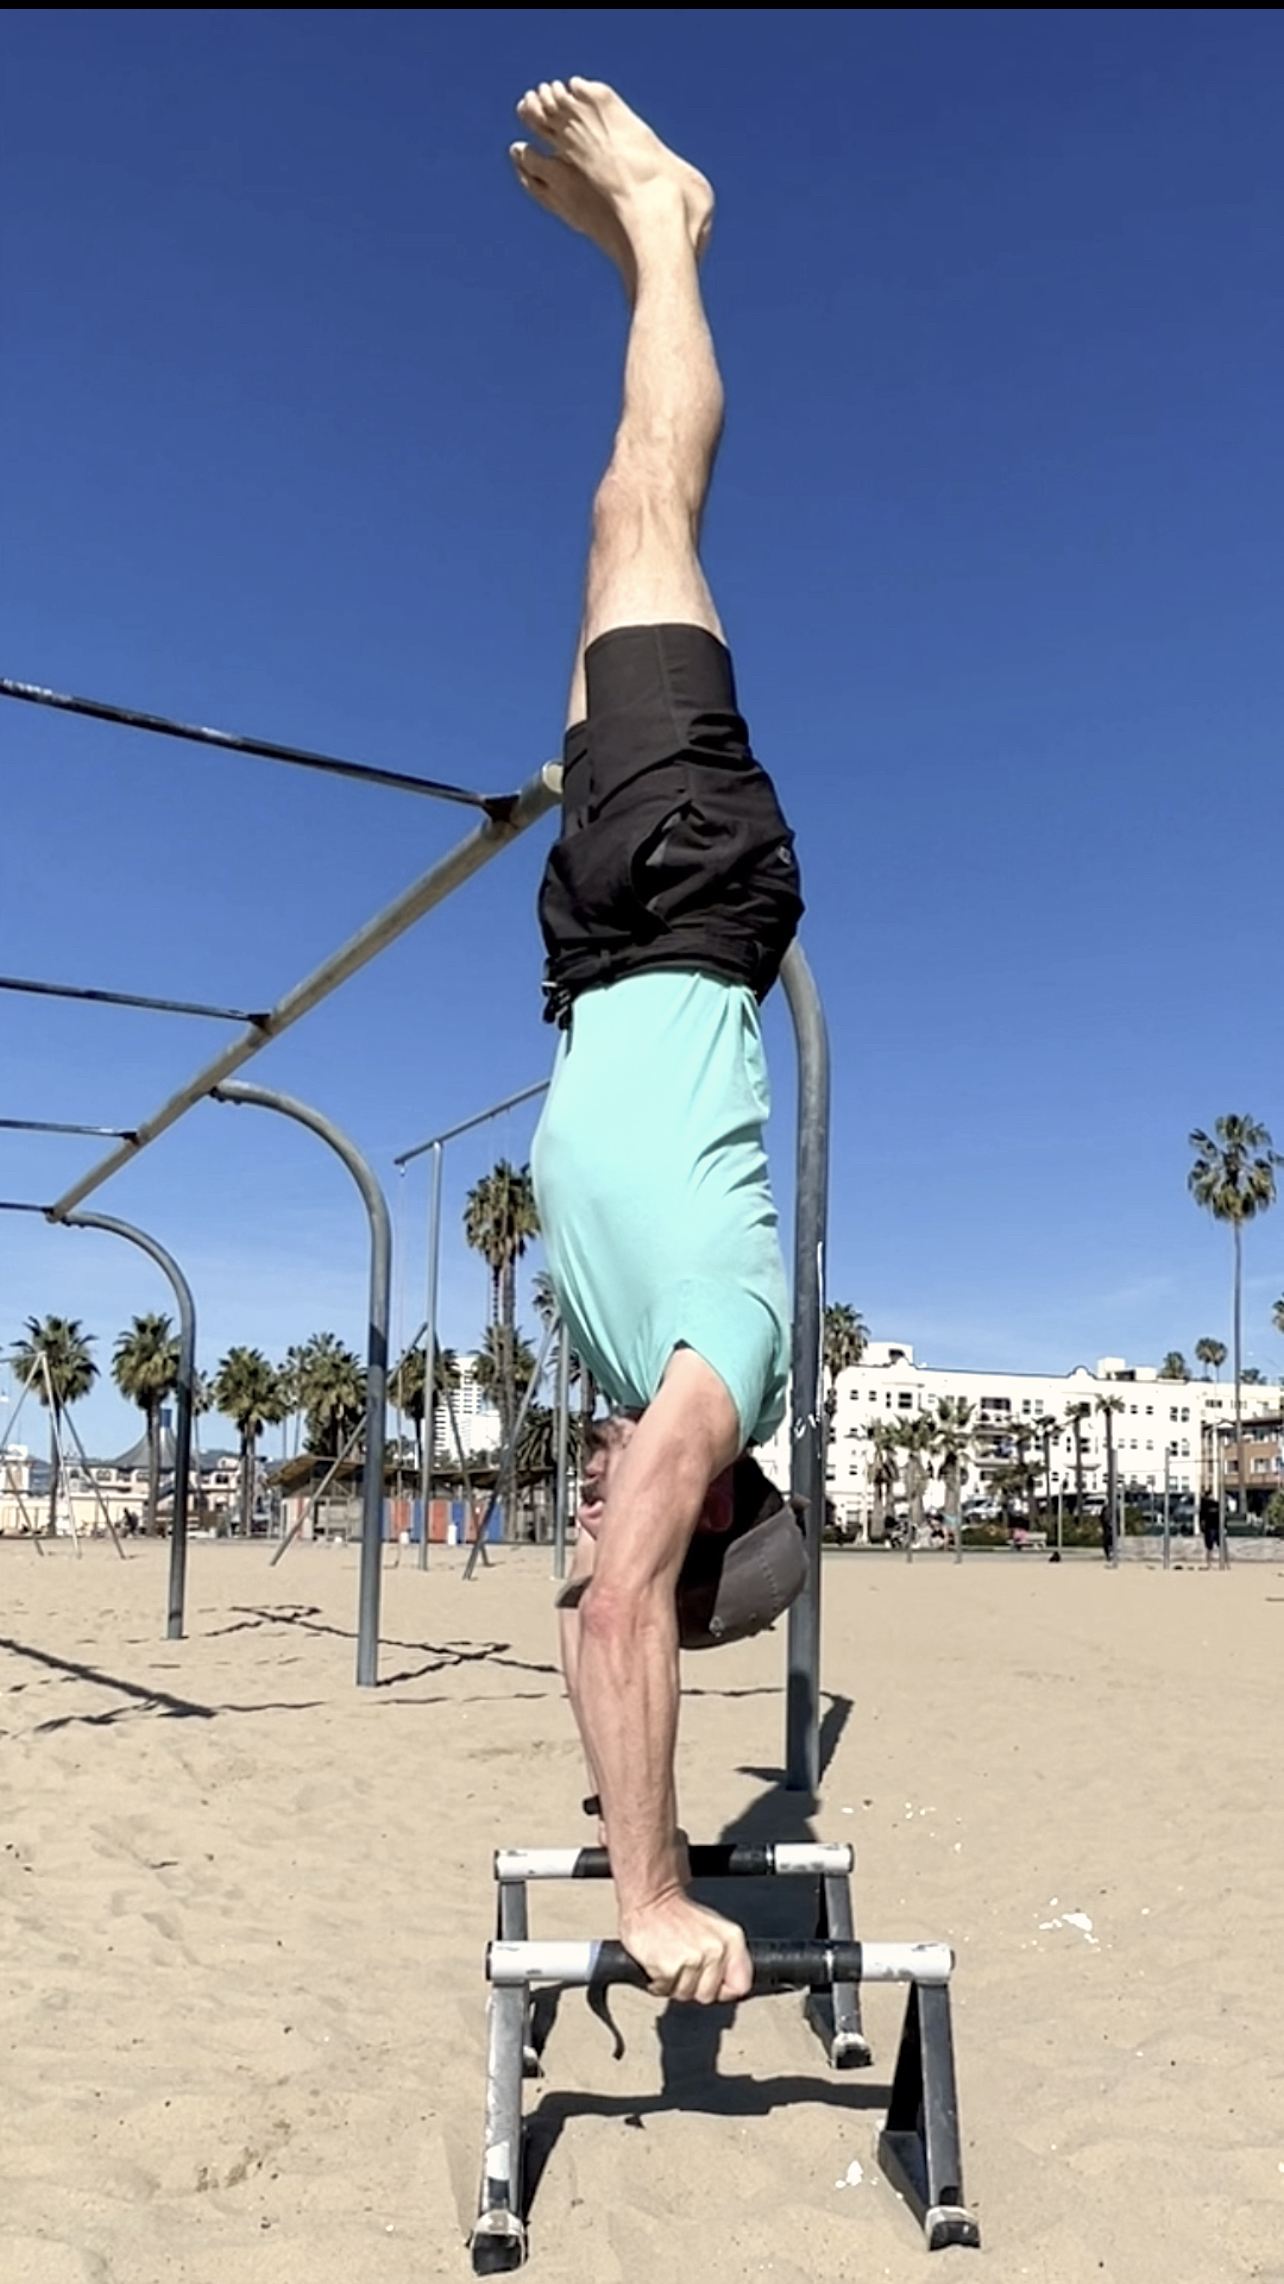 Rob Cowell, PT, Why I exercise, straight handstand